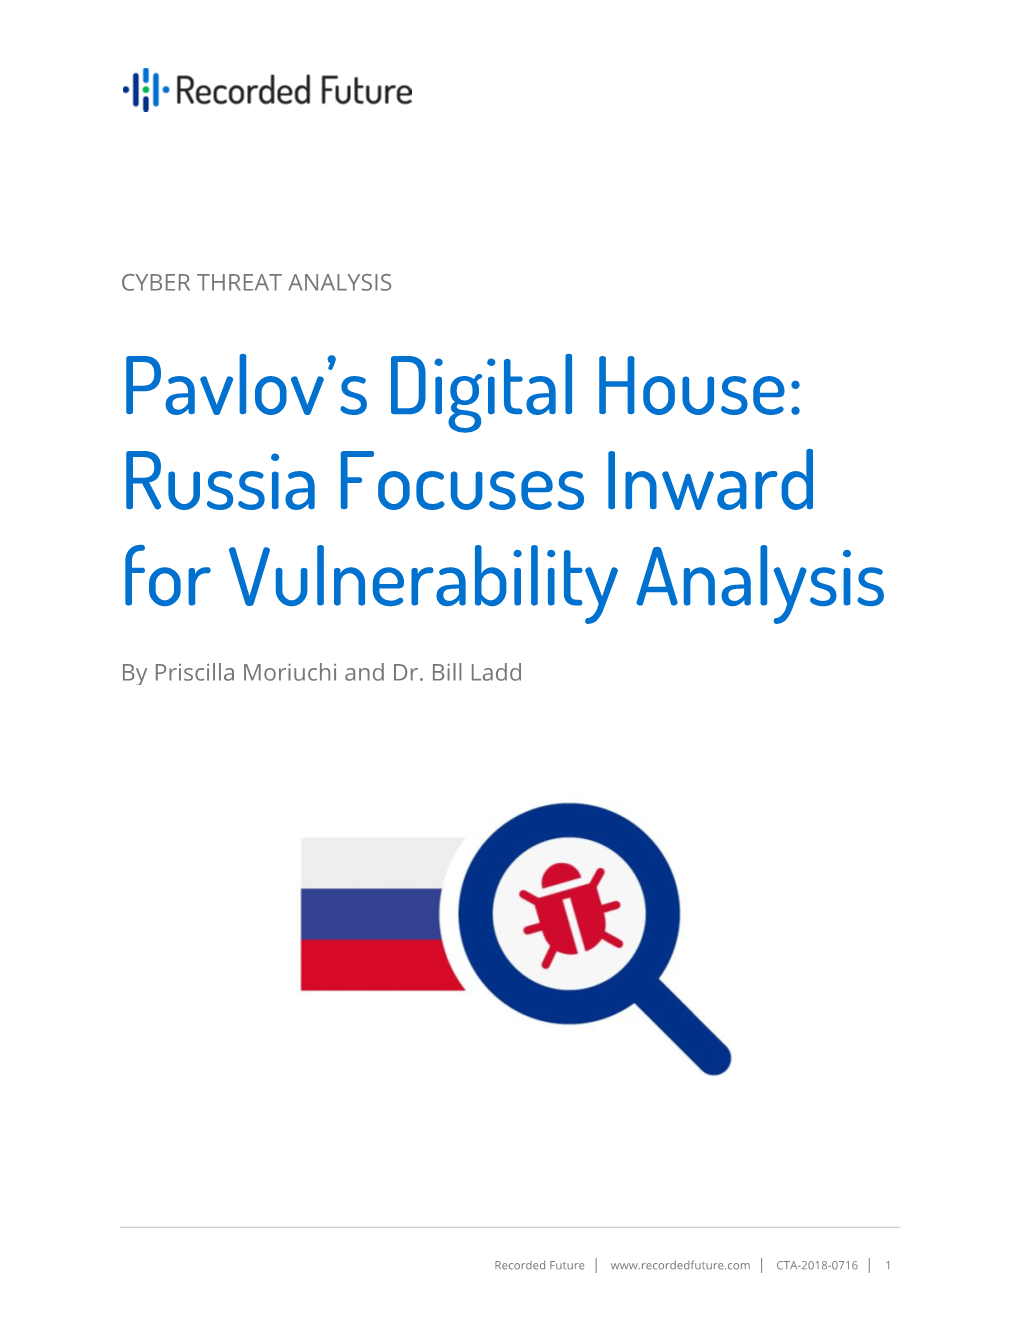 Russia Focuses Inward for Vulnerability Analysis